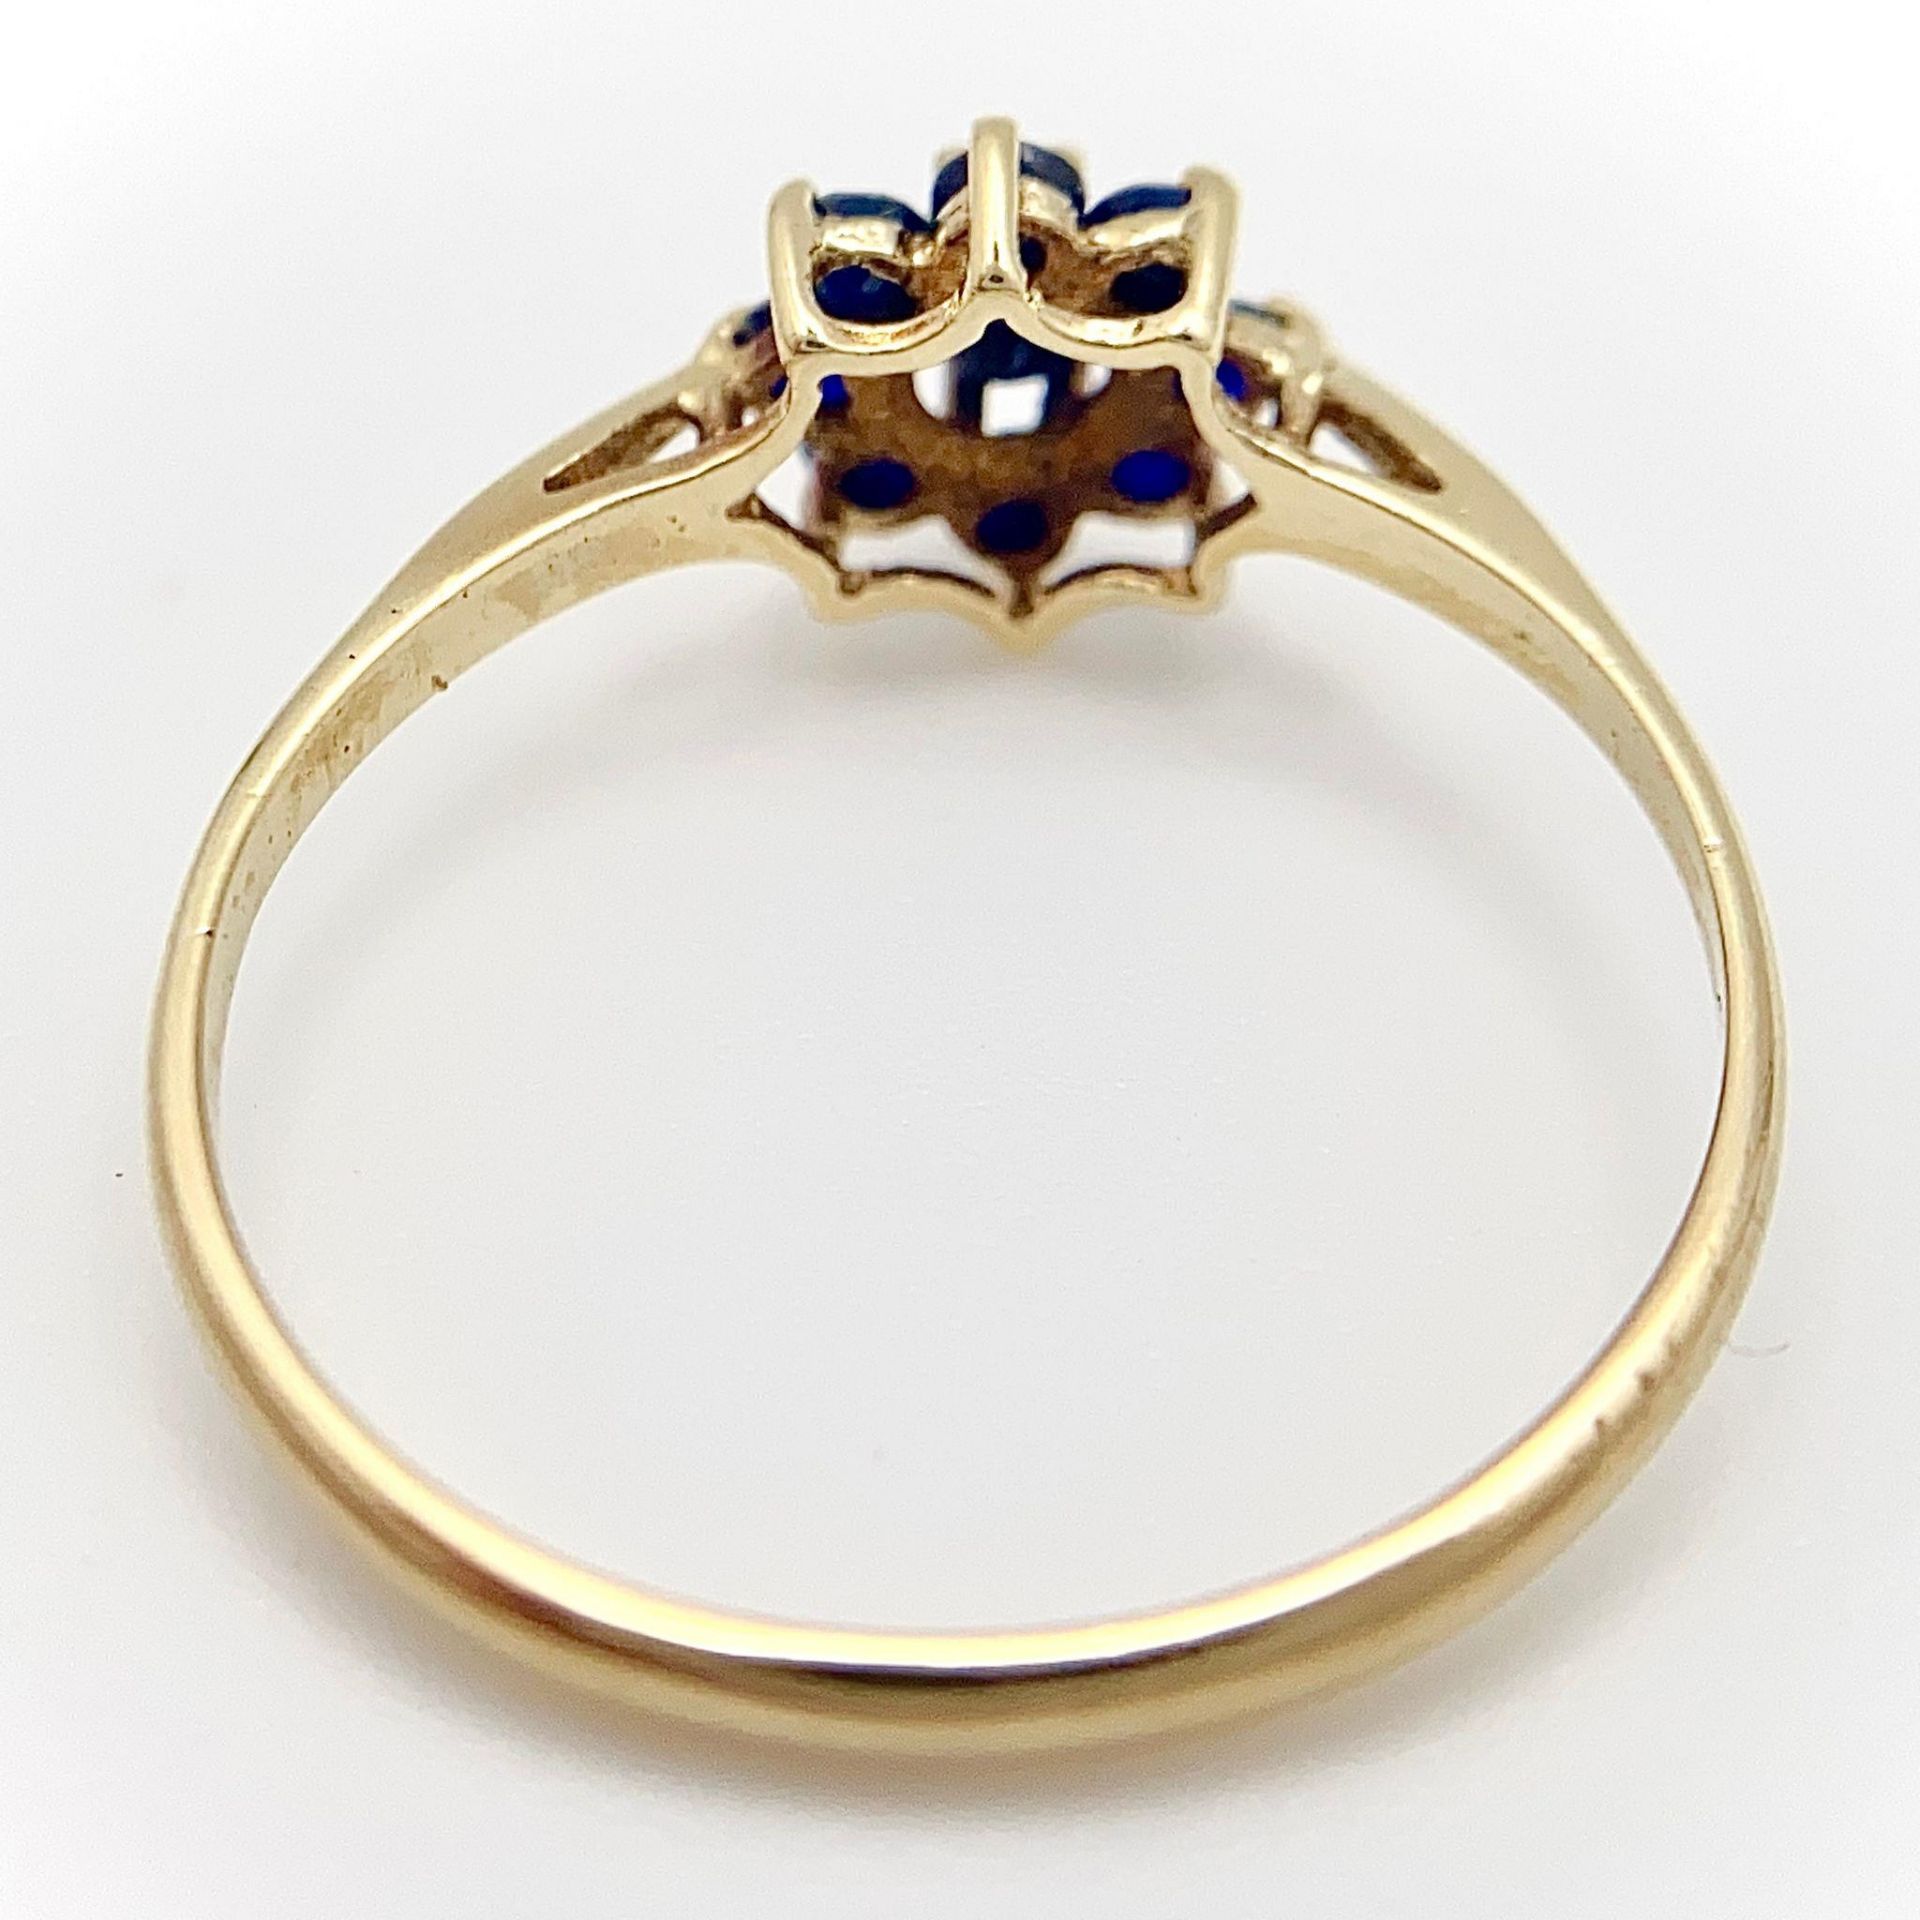 A 9K YELLOW GOLD SAPPHIRE SET CLUSTER RING. 1.3G. SIZE Q. - Image 6 of 9